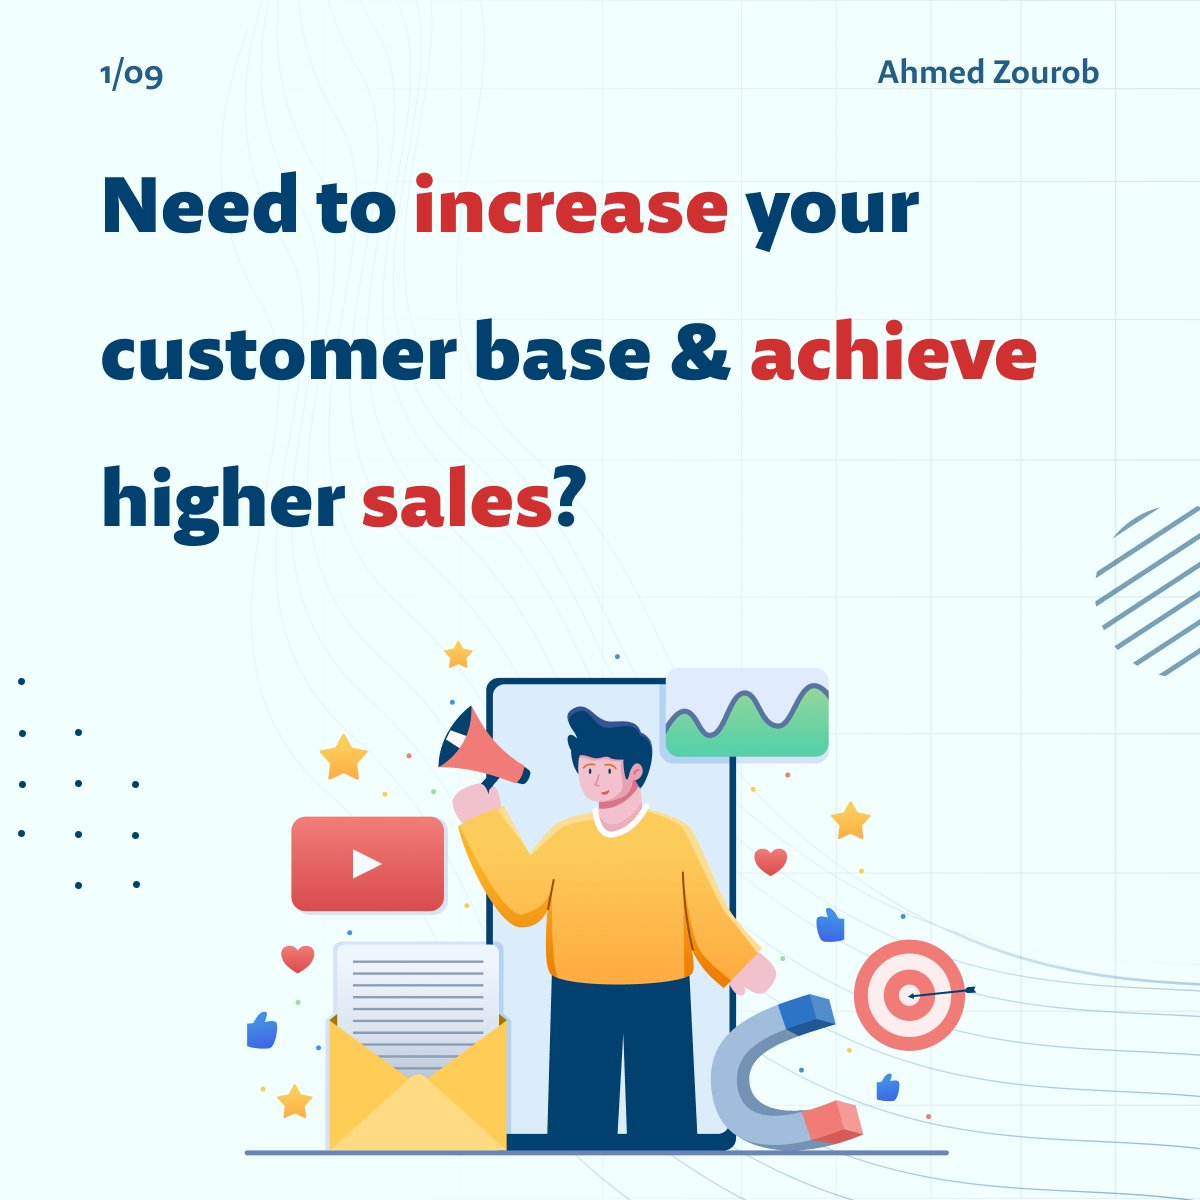 📷Need to increase your customer base 🔥?
achive higher sales 🔥?
.
.
.

#uxdesigner #appdesign #uiux #userinterfacedesign #uitrends #userexperience #interfacedesign #designtrends #app #design #figma #mobiledesign #designapp #behance #uxinspiration #uiinspiration